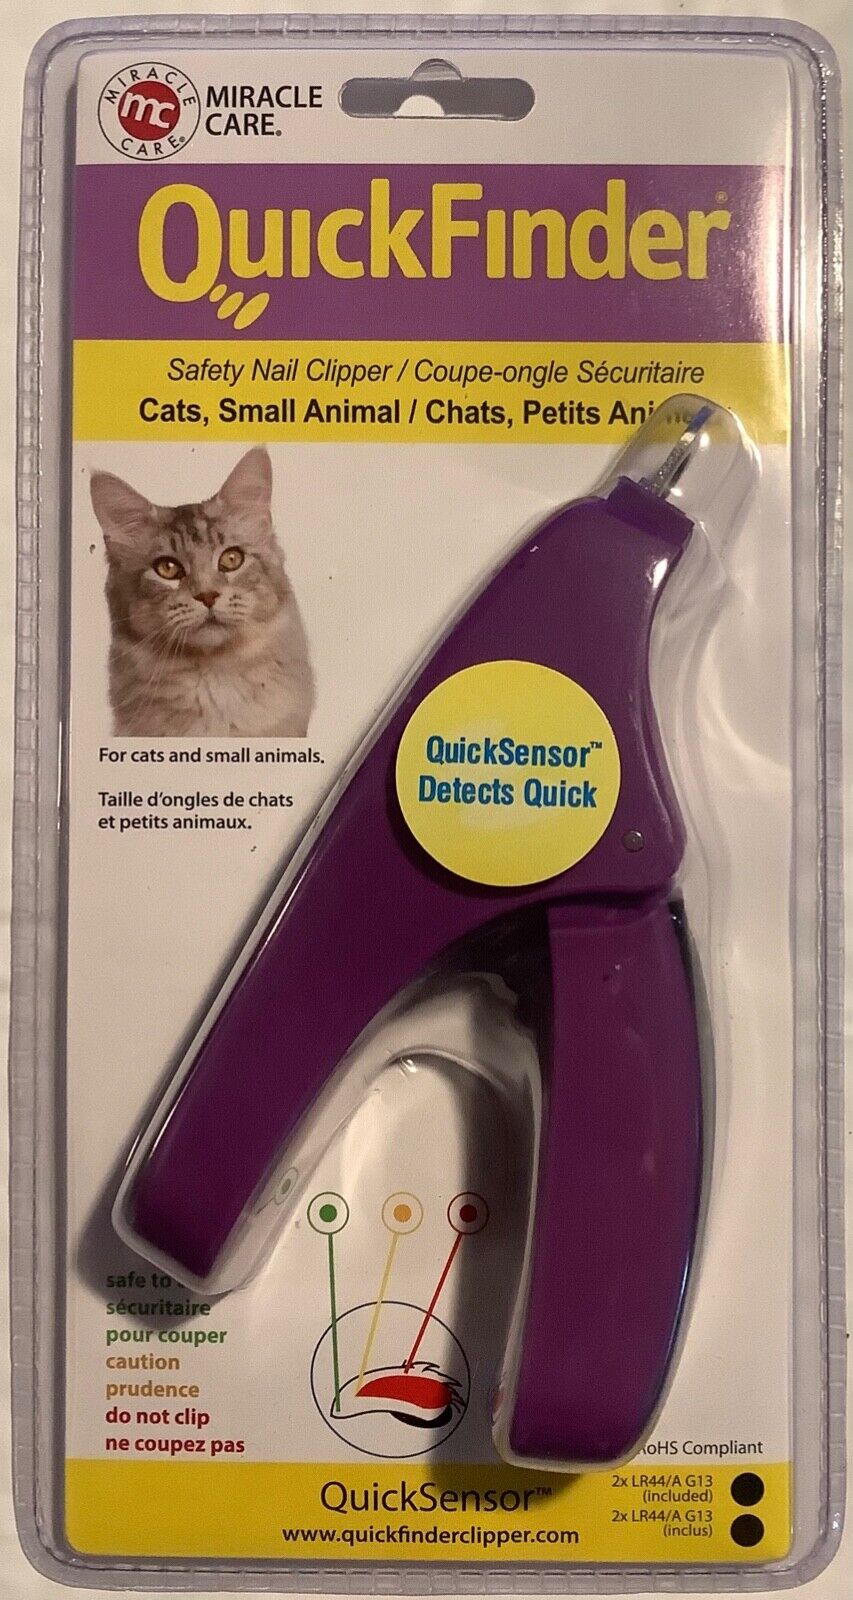 Quickfinder II Nail Clipper Cat/Small Animal